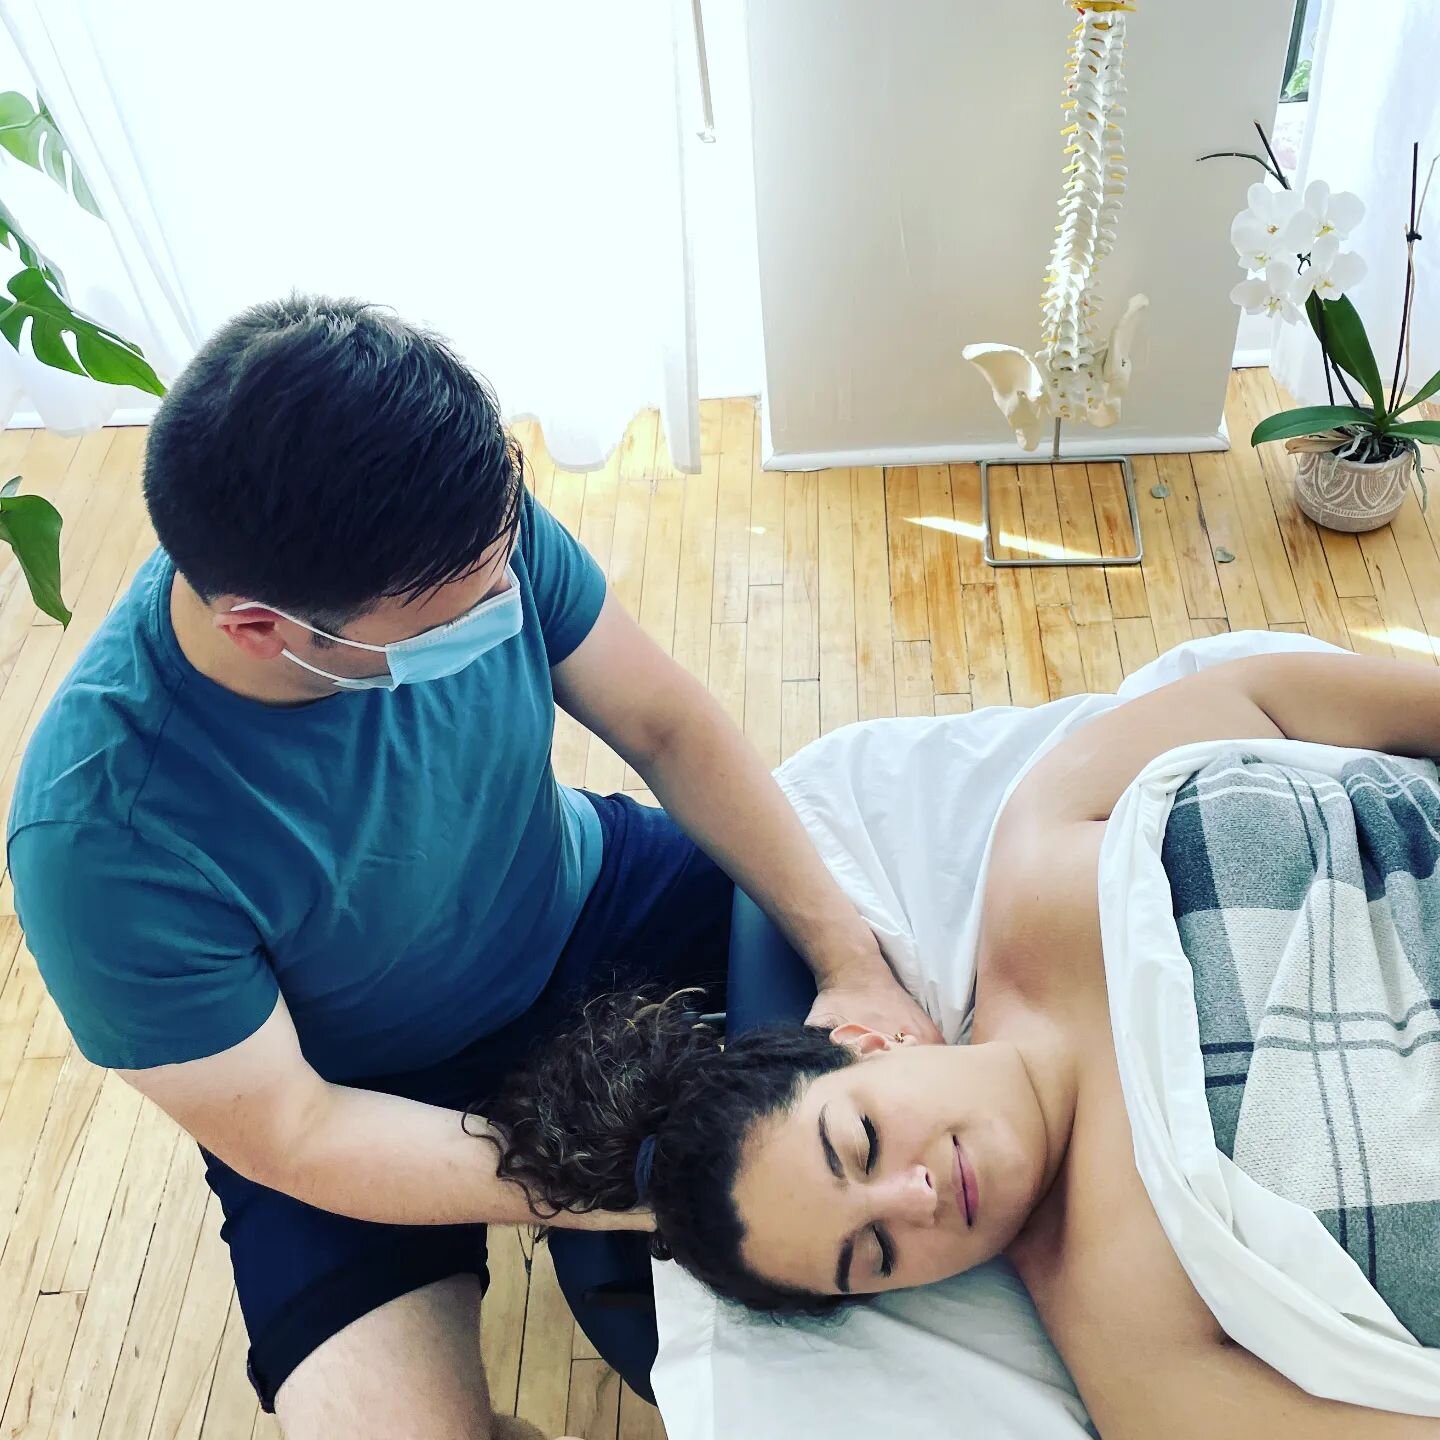 Treating pain doesn't have to be painful!

📸@shelly.avner

#massage #painrelief #recovery #neckpain  #selfcare #theannex #toronto #the6ix